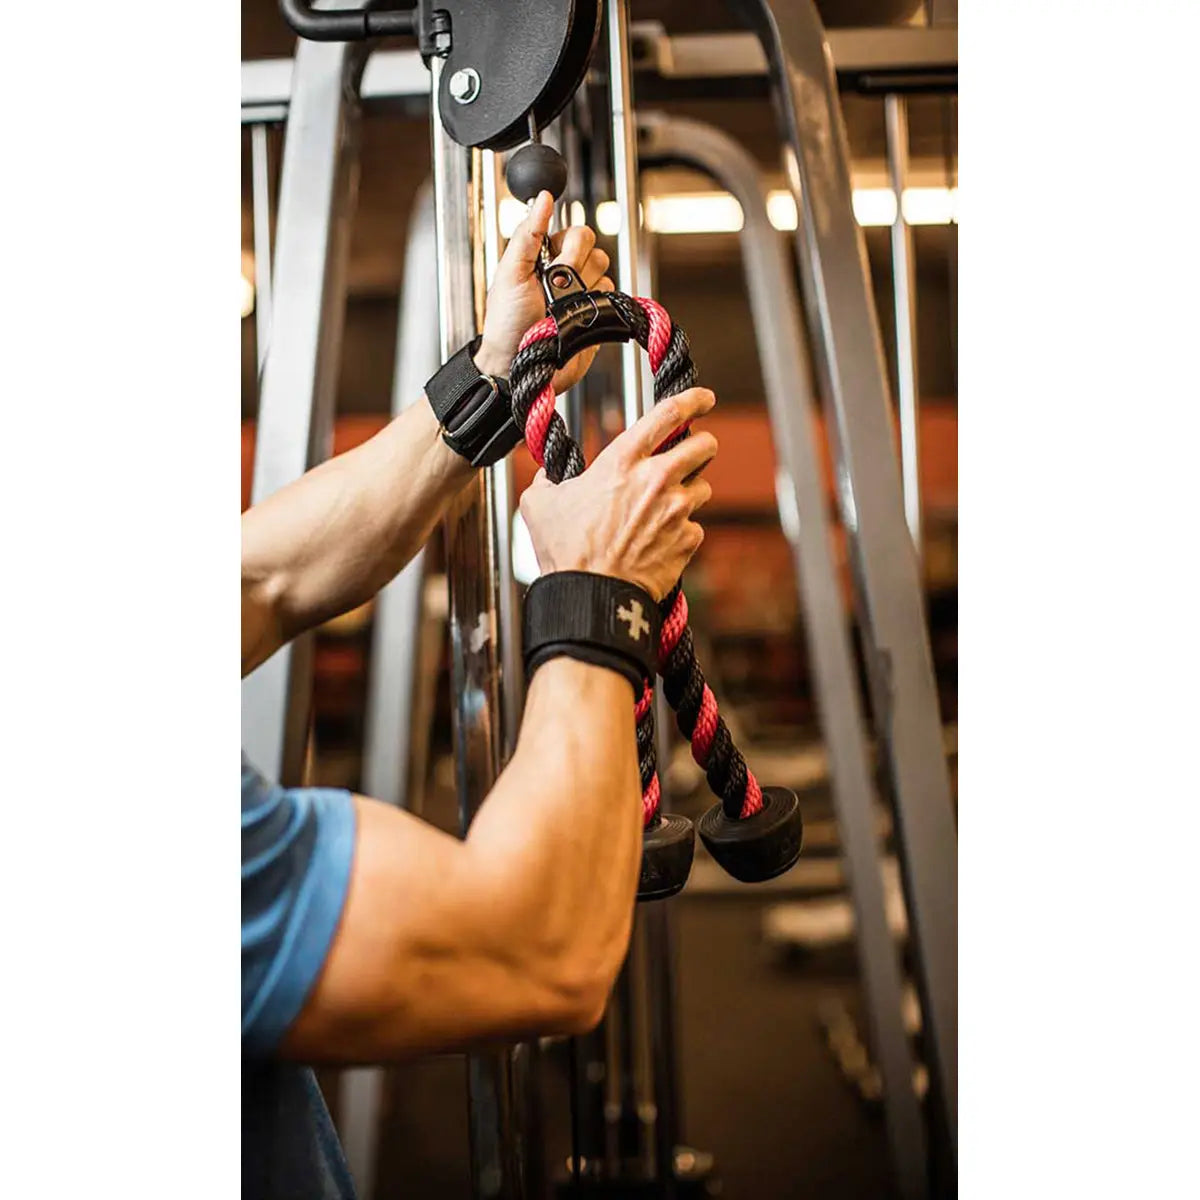 Harbinger 36" Tricep Rope Cable Attachment Harbinger